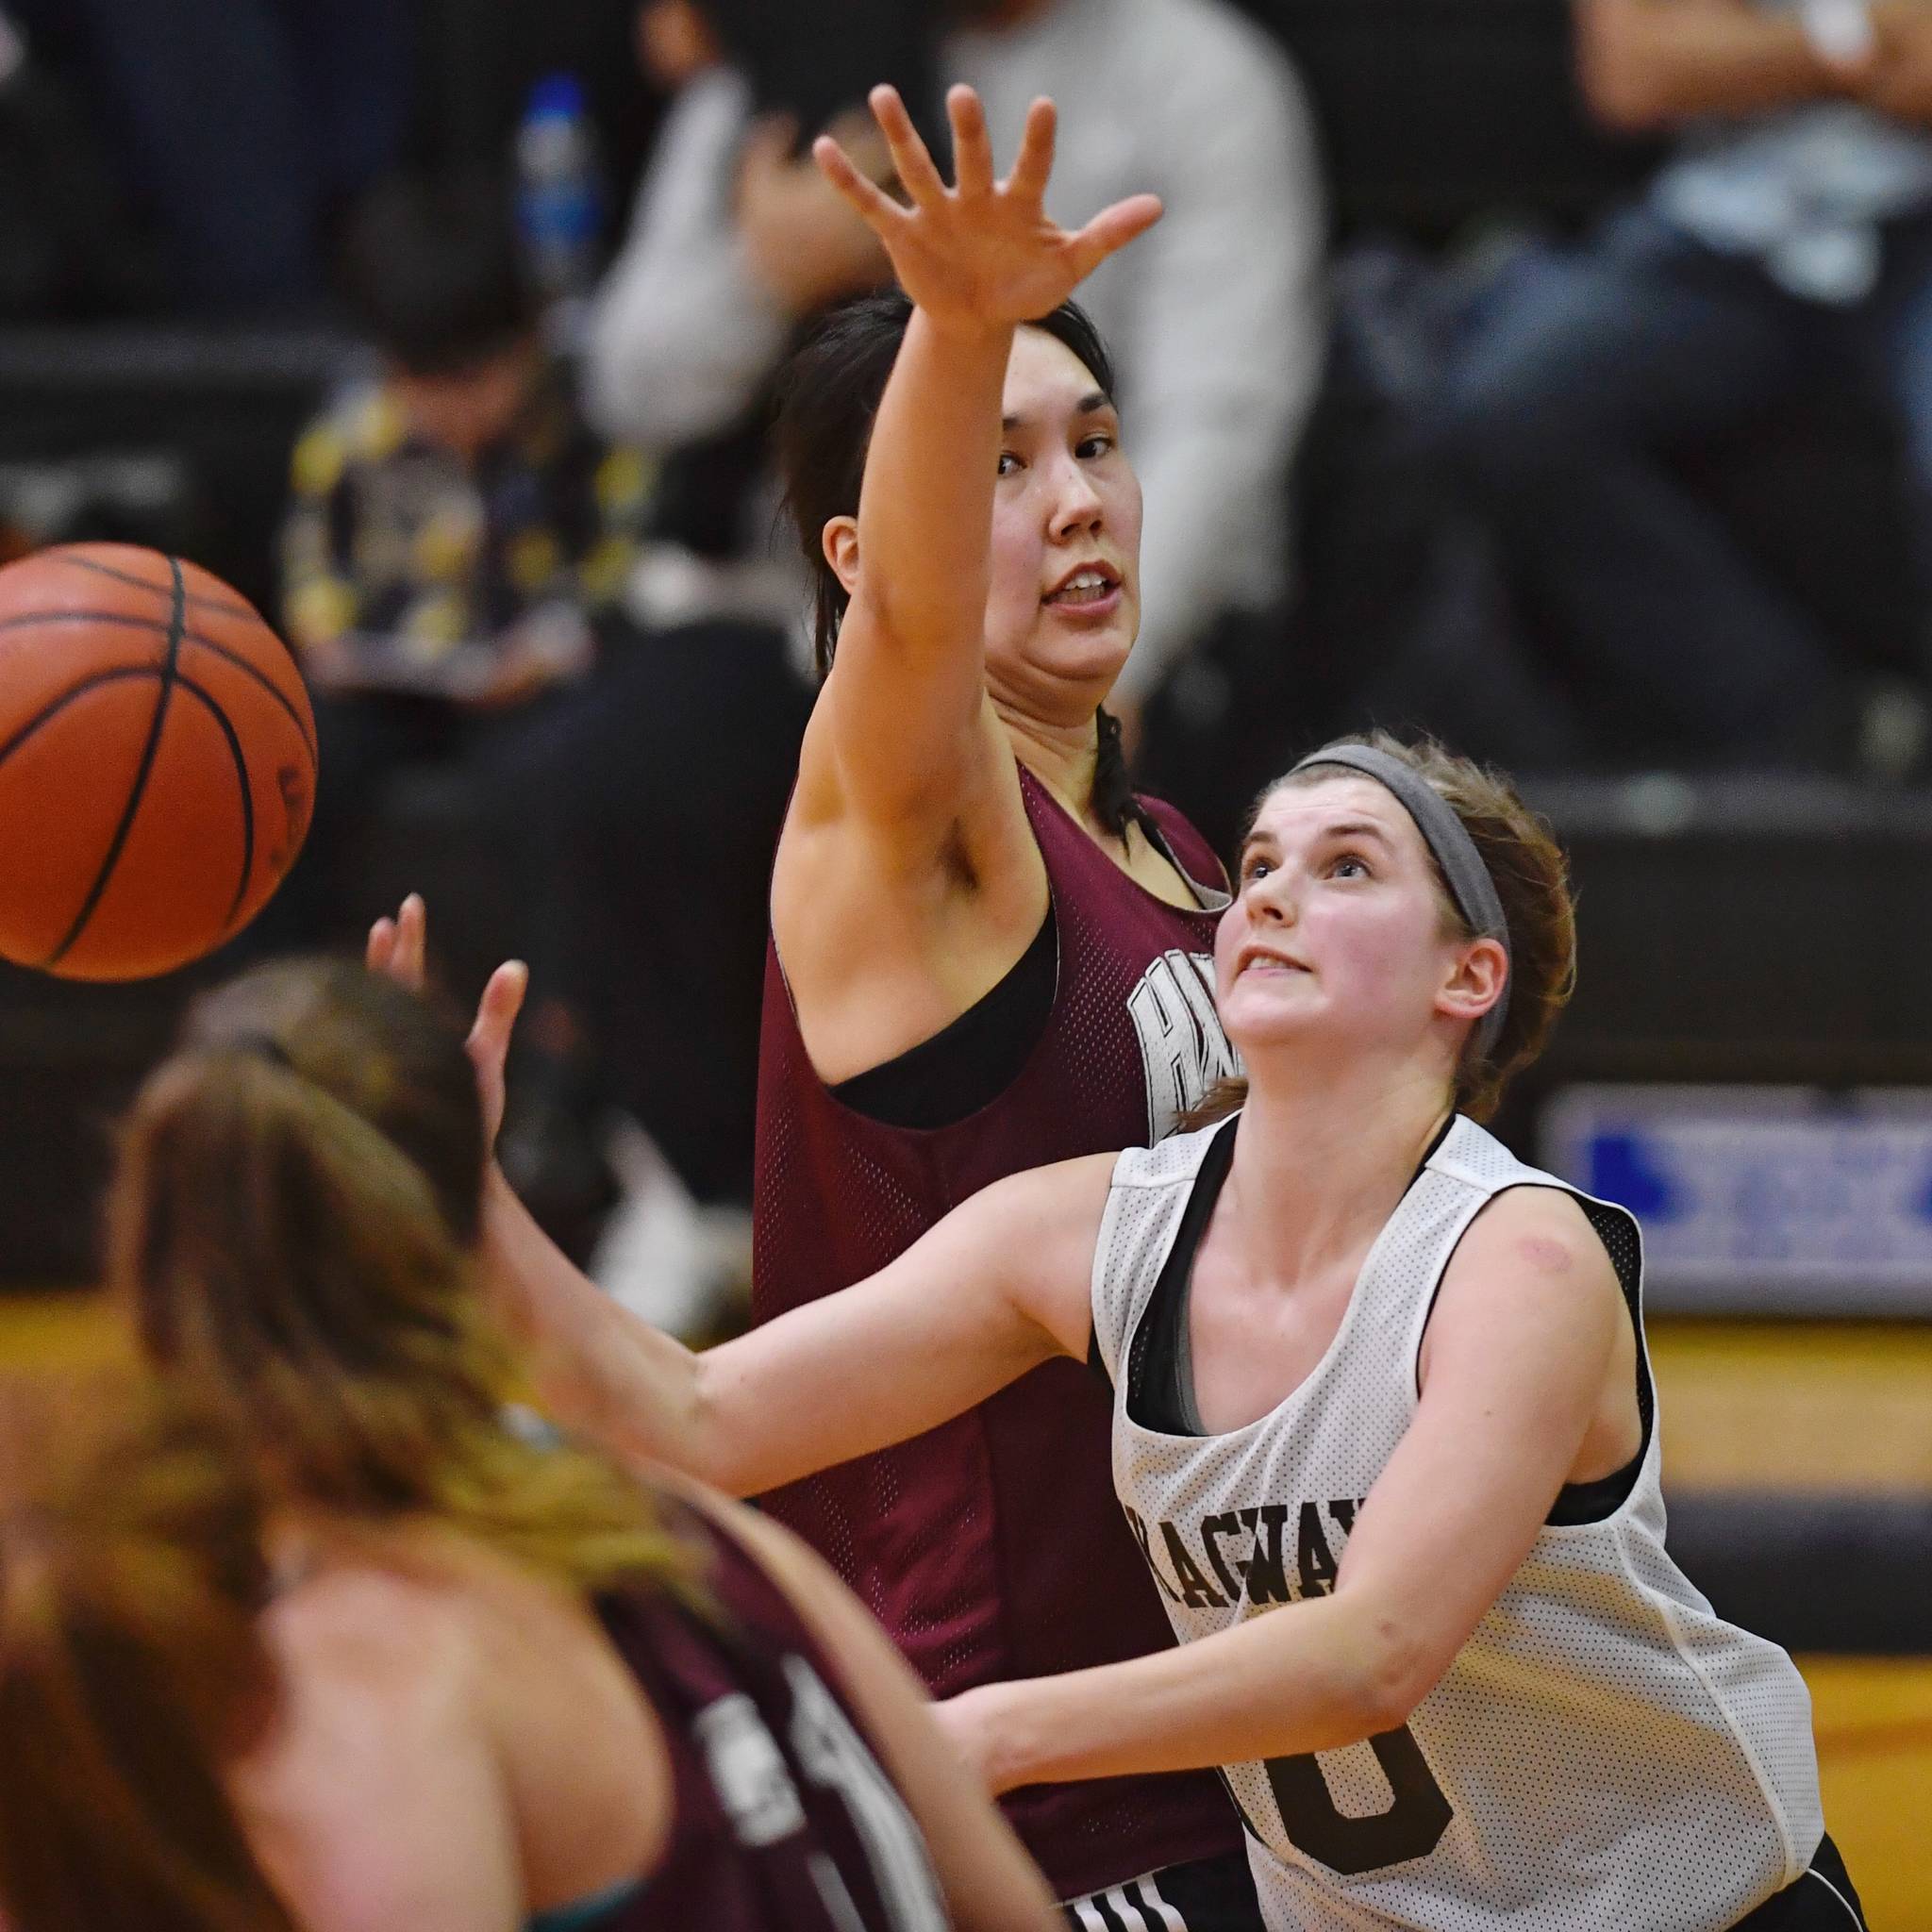 Skagway’s Kaylie Smith, right, shoots against Haines’ Fran Daly in the women’s final at the Gold Medal Basketball Tournament on Saturday, March 23, 2019. (Michael Penn | Juneau Empire)